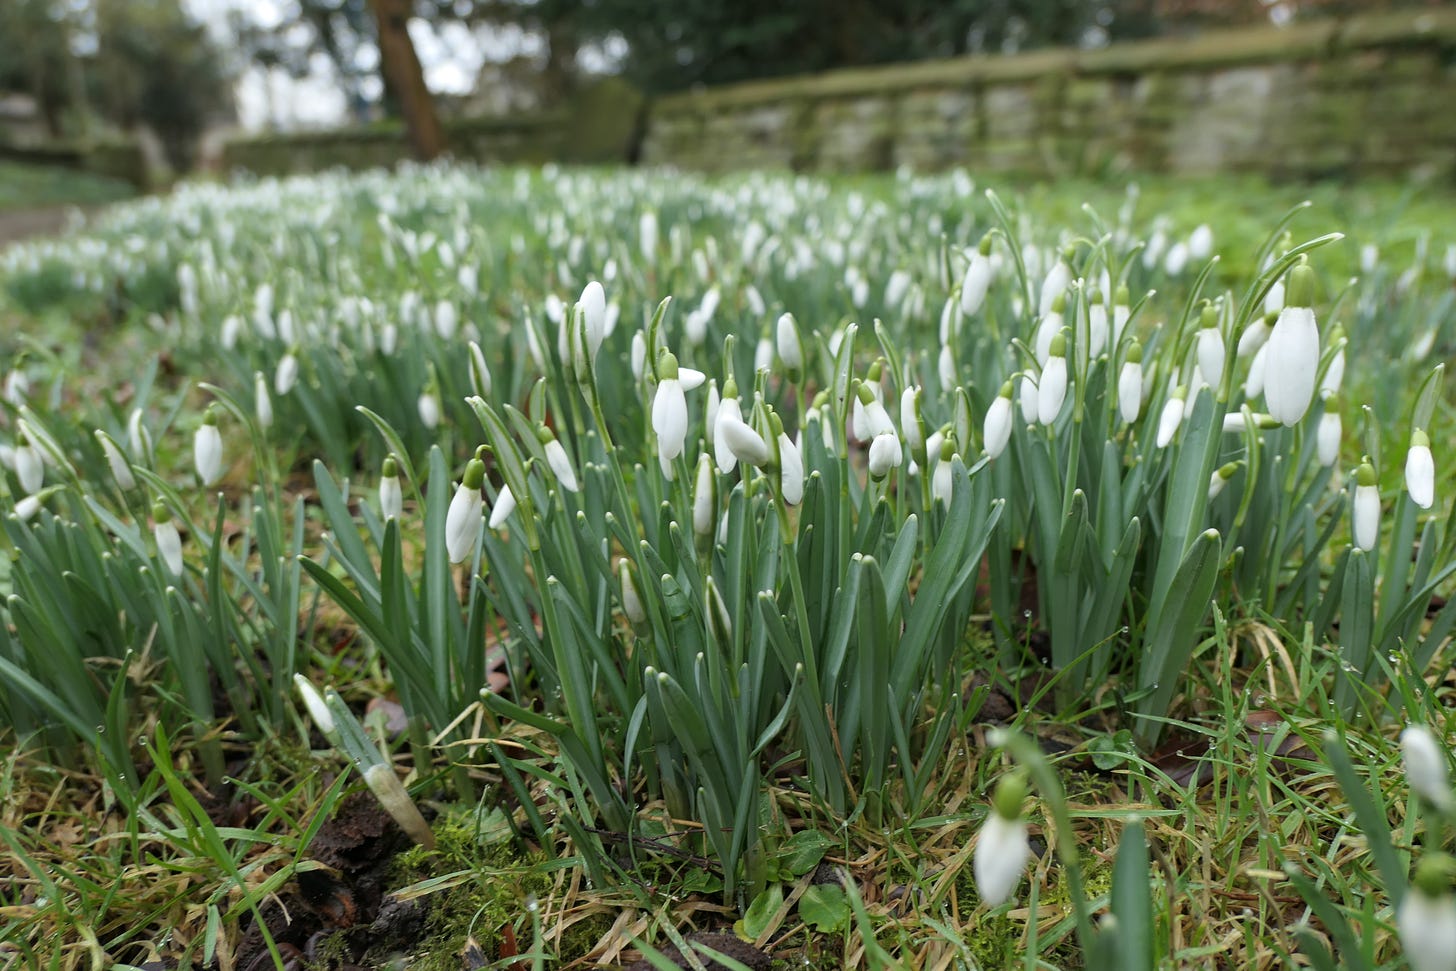 Snowdrops at All Saints’, Leamington Hastings (c) South Rugby News